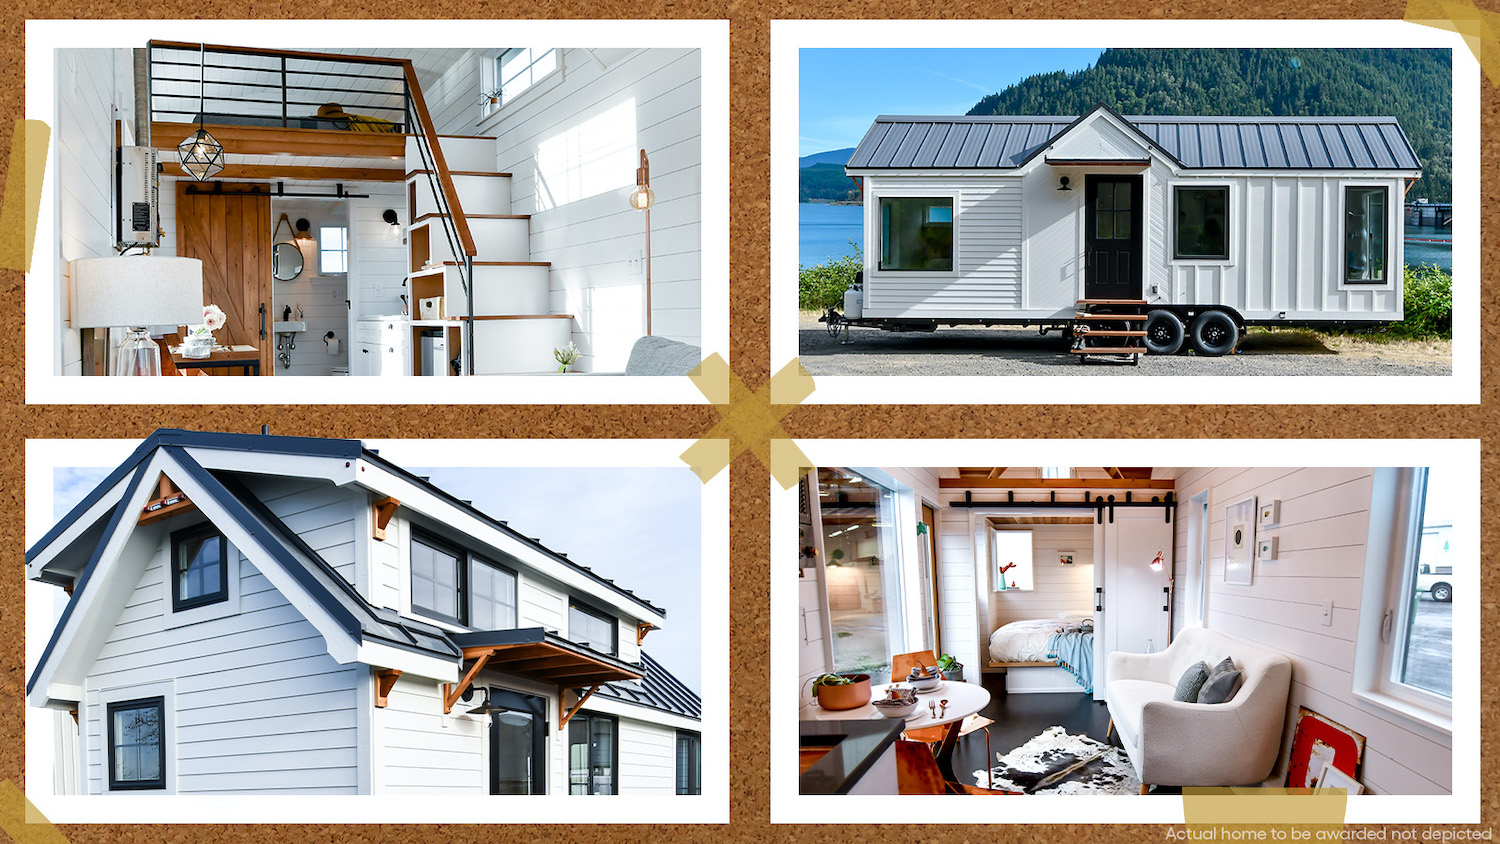 A composite image showing different tiny home designs from the company Tru Form Tiny